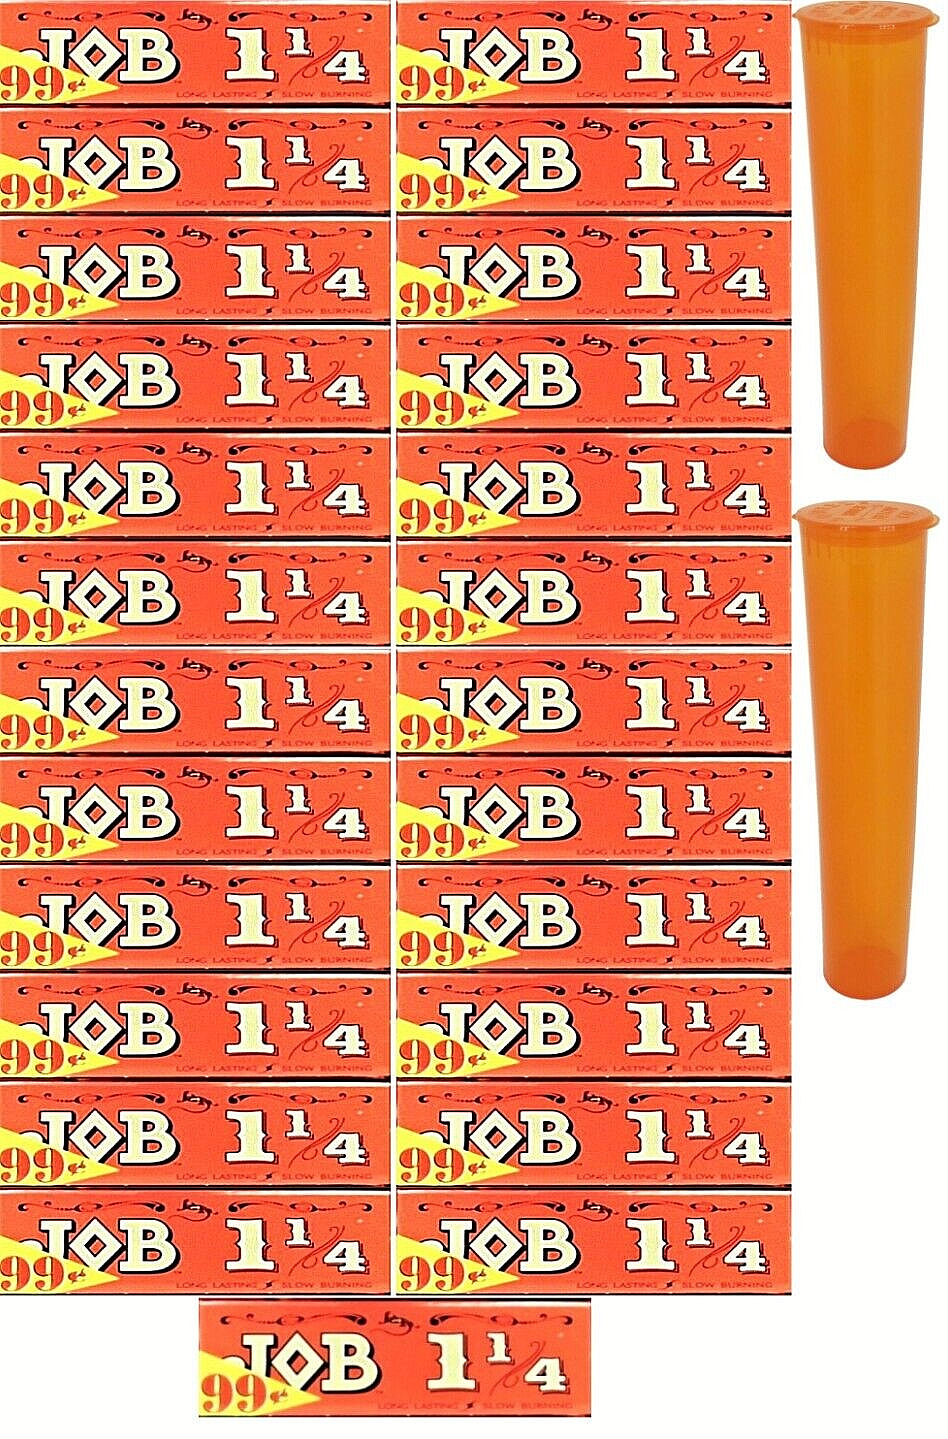 25x Job Rolling Papers 1 1/4 Orange Red w/2 tubes Authentic *Best Price*USA SHPD